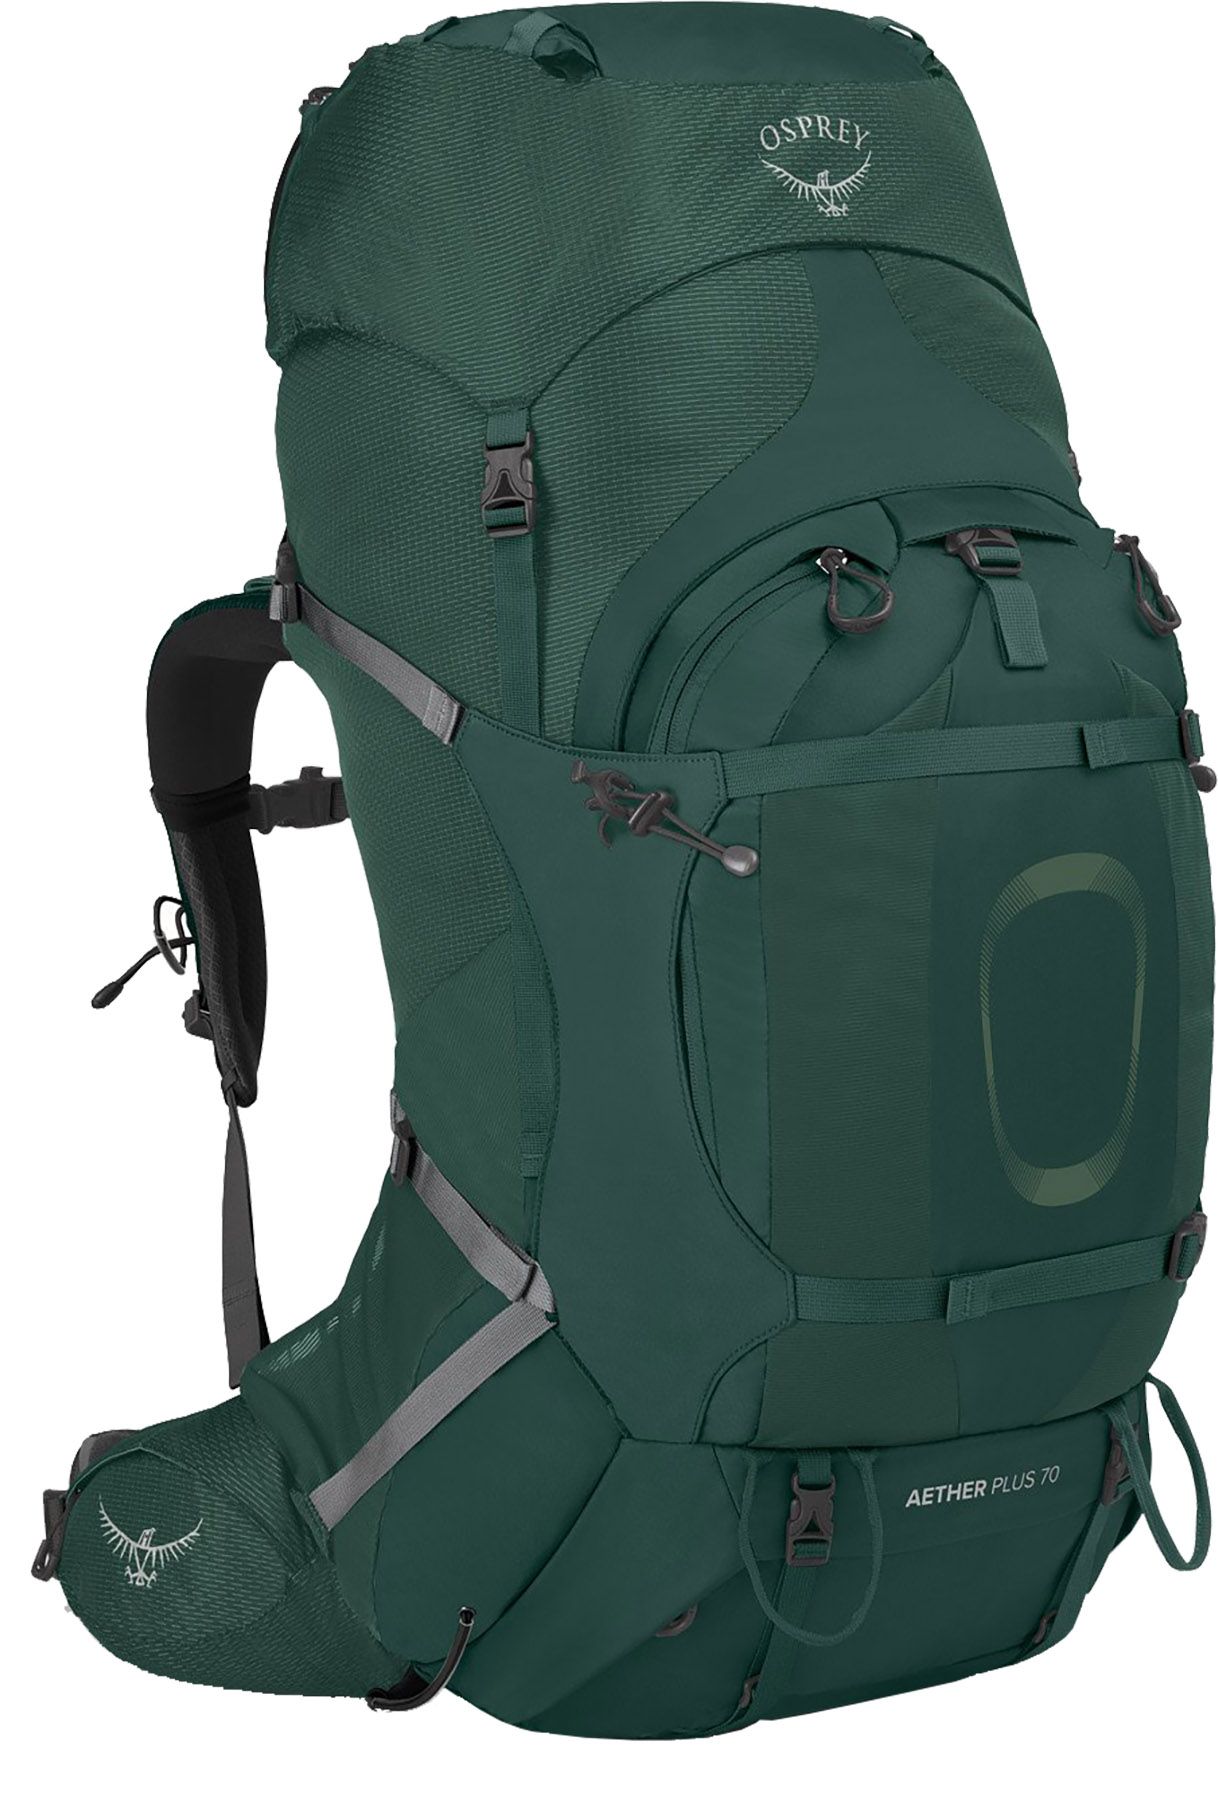 Photos - Knife / Multitool Osprey Aether Plus 70 Pack, Men's, L/XL, Axo Green | Father's Day Gift Ide 